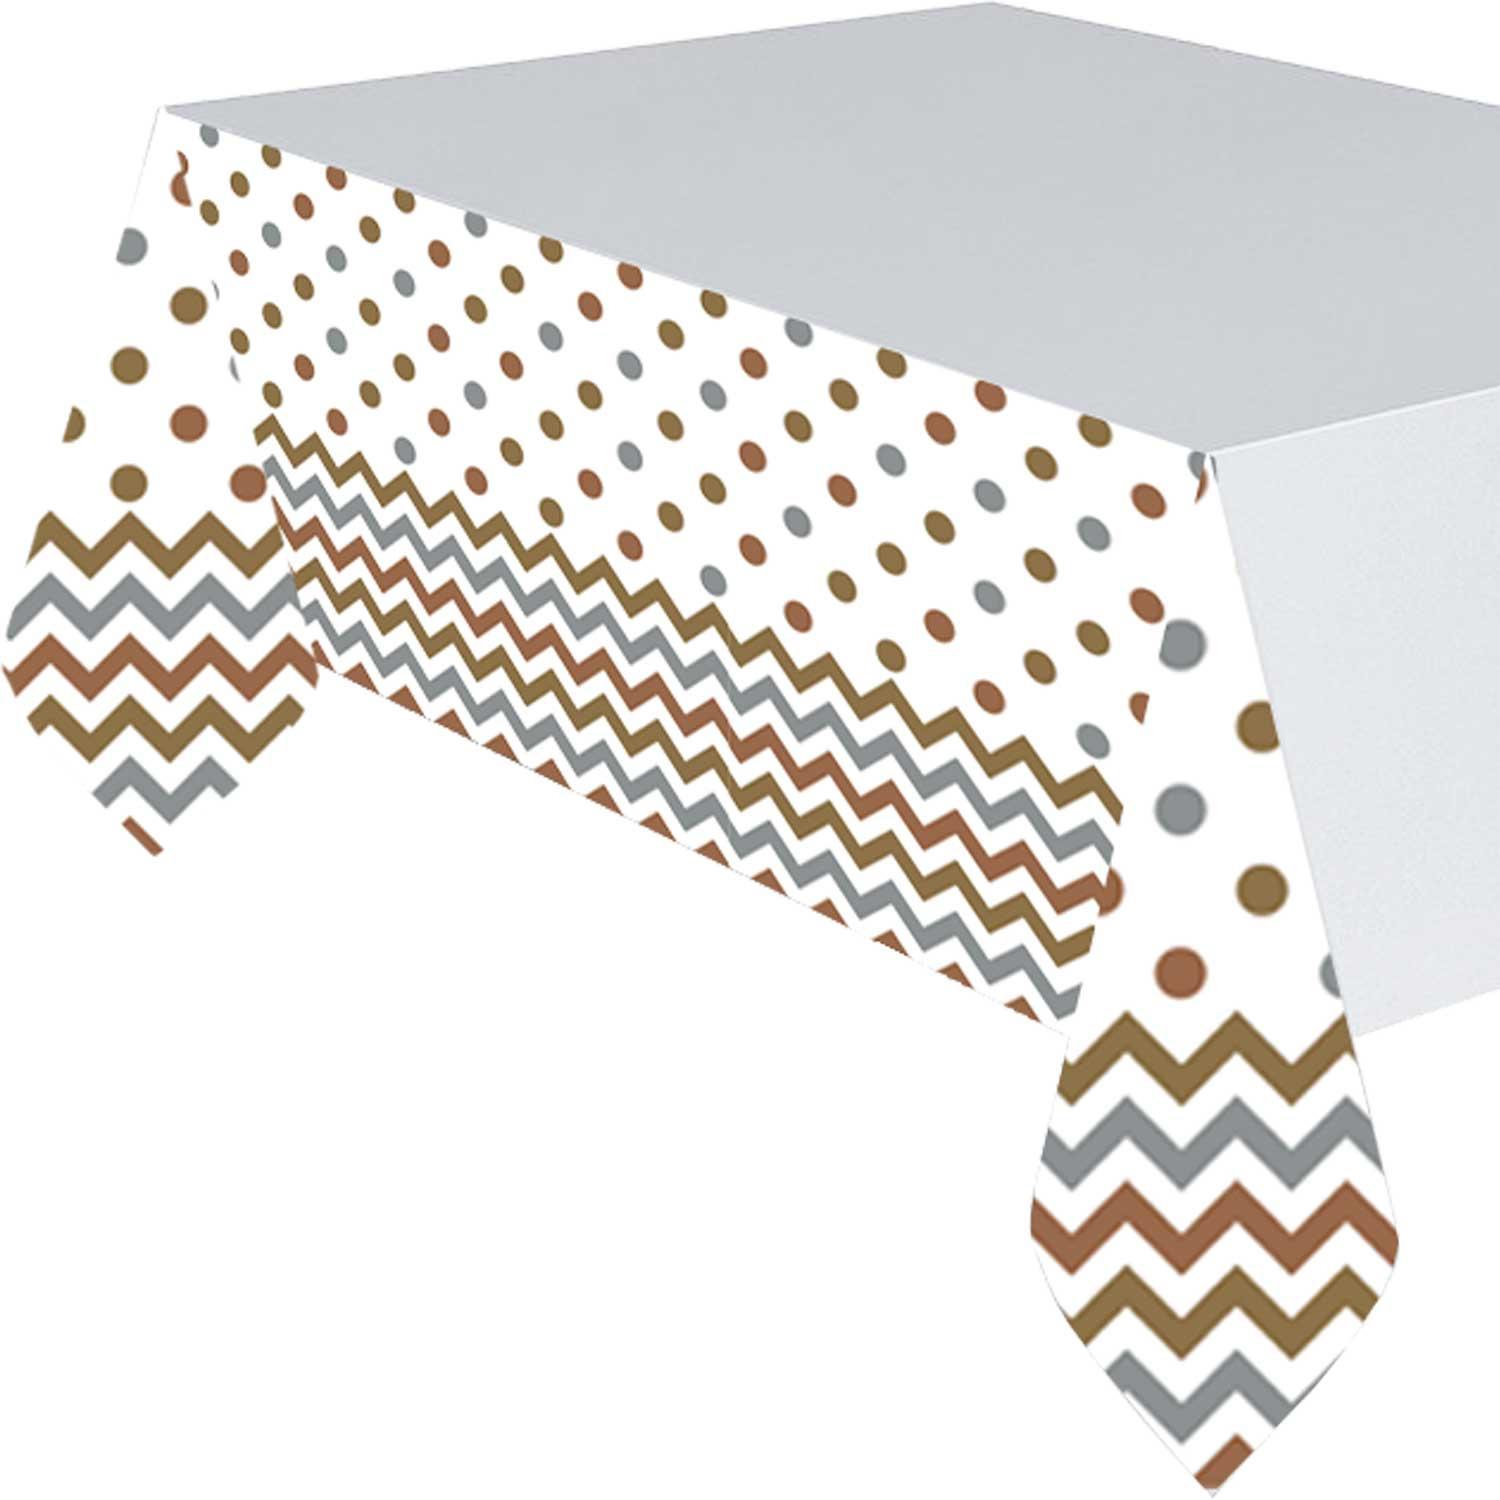 Mixed Metals Chevron Party Plastic Table Cover 54x102in Printed Tableware - Party Centre